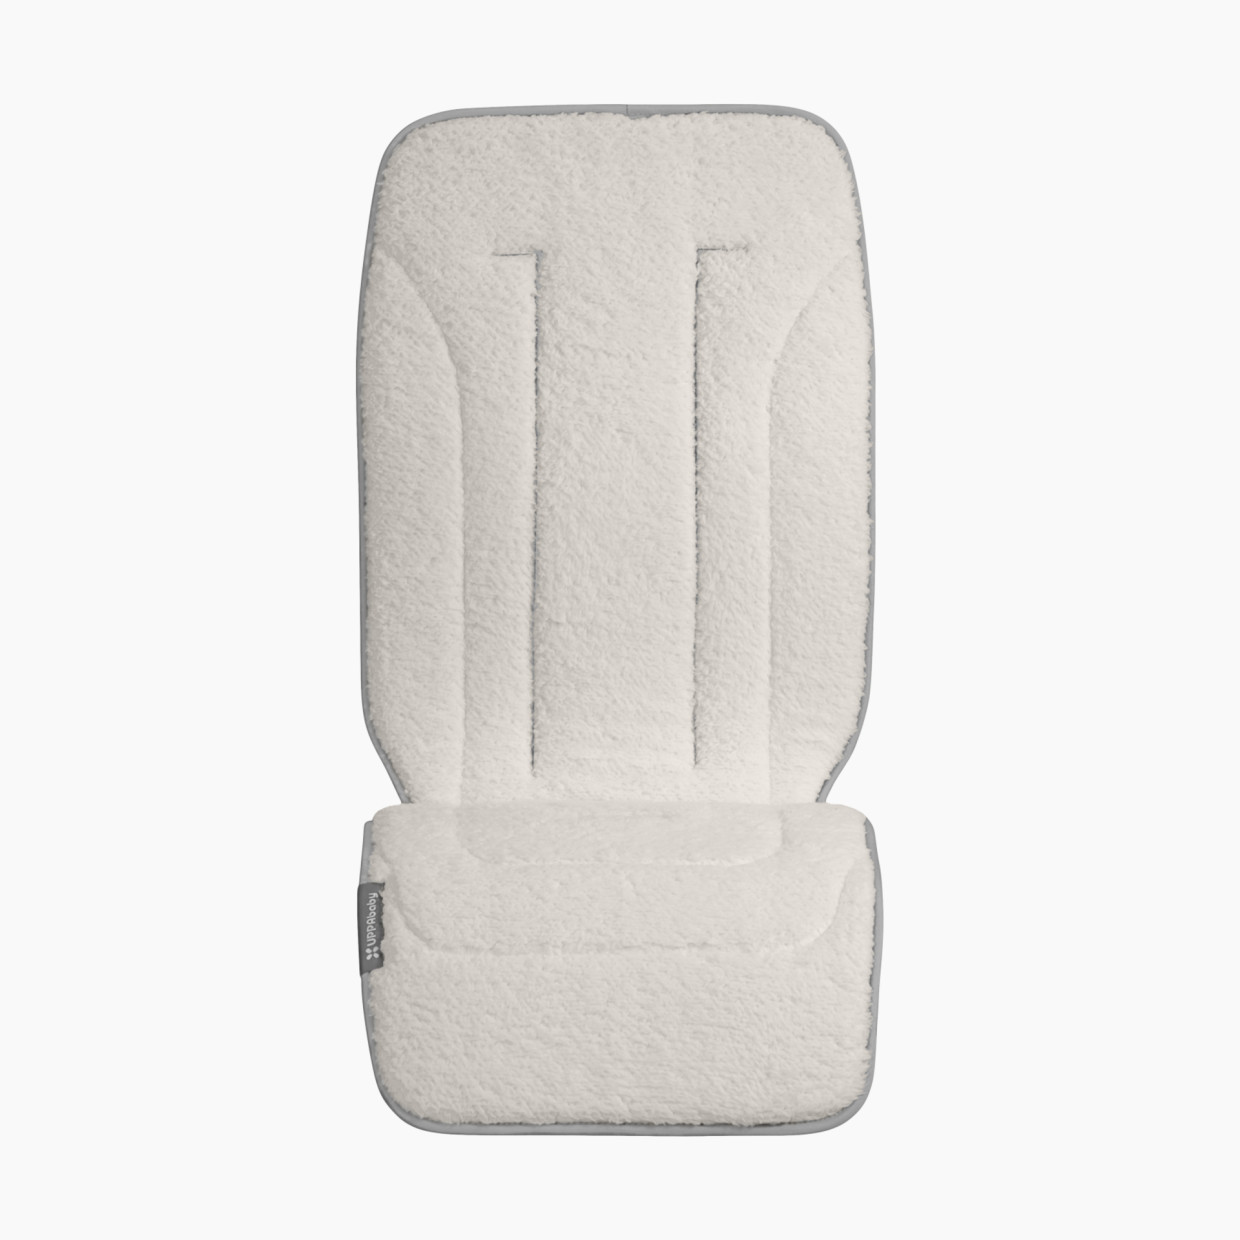 UPPAbaby Reversible Seat Liner - Phoebe.